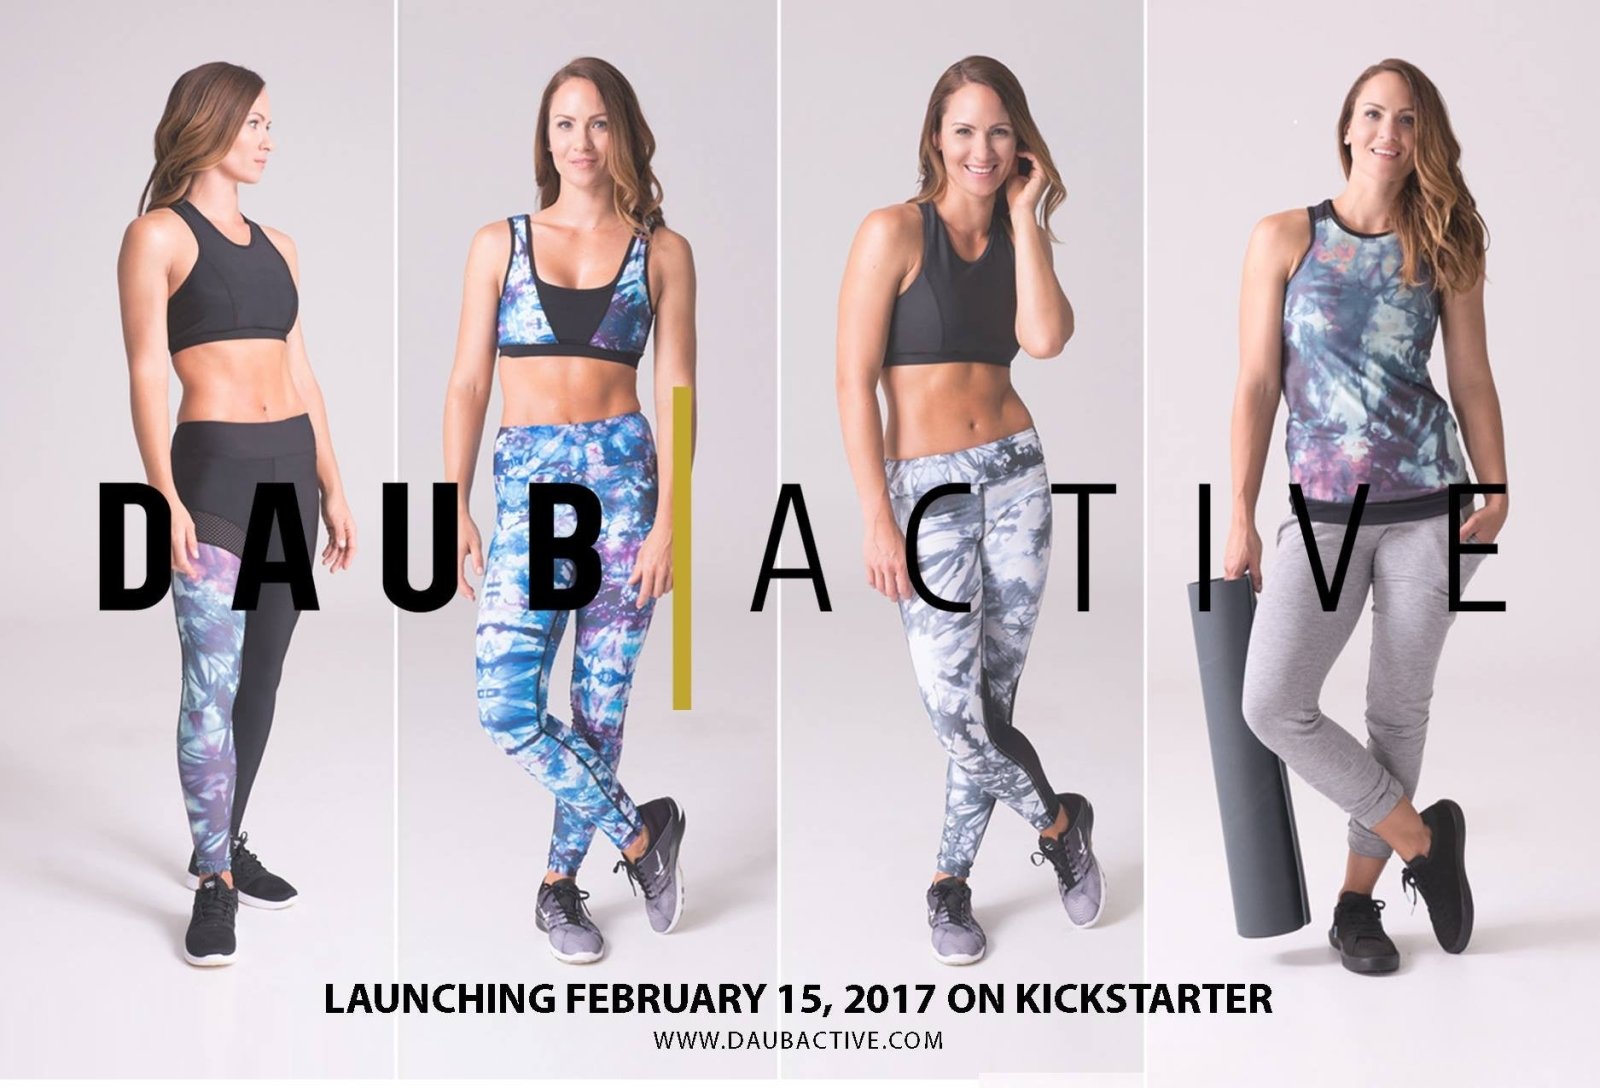 DAUB | ACTIVE Launches With The Focus On Women To Do Better, Be Better